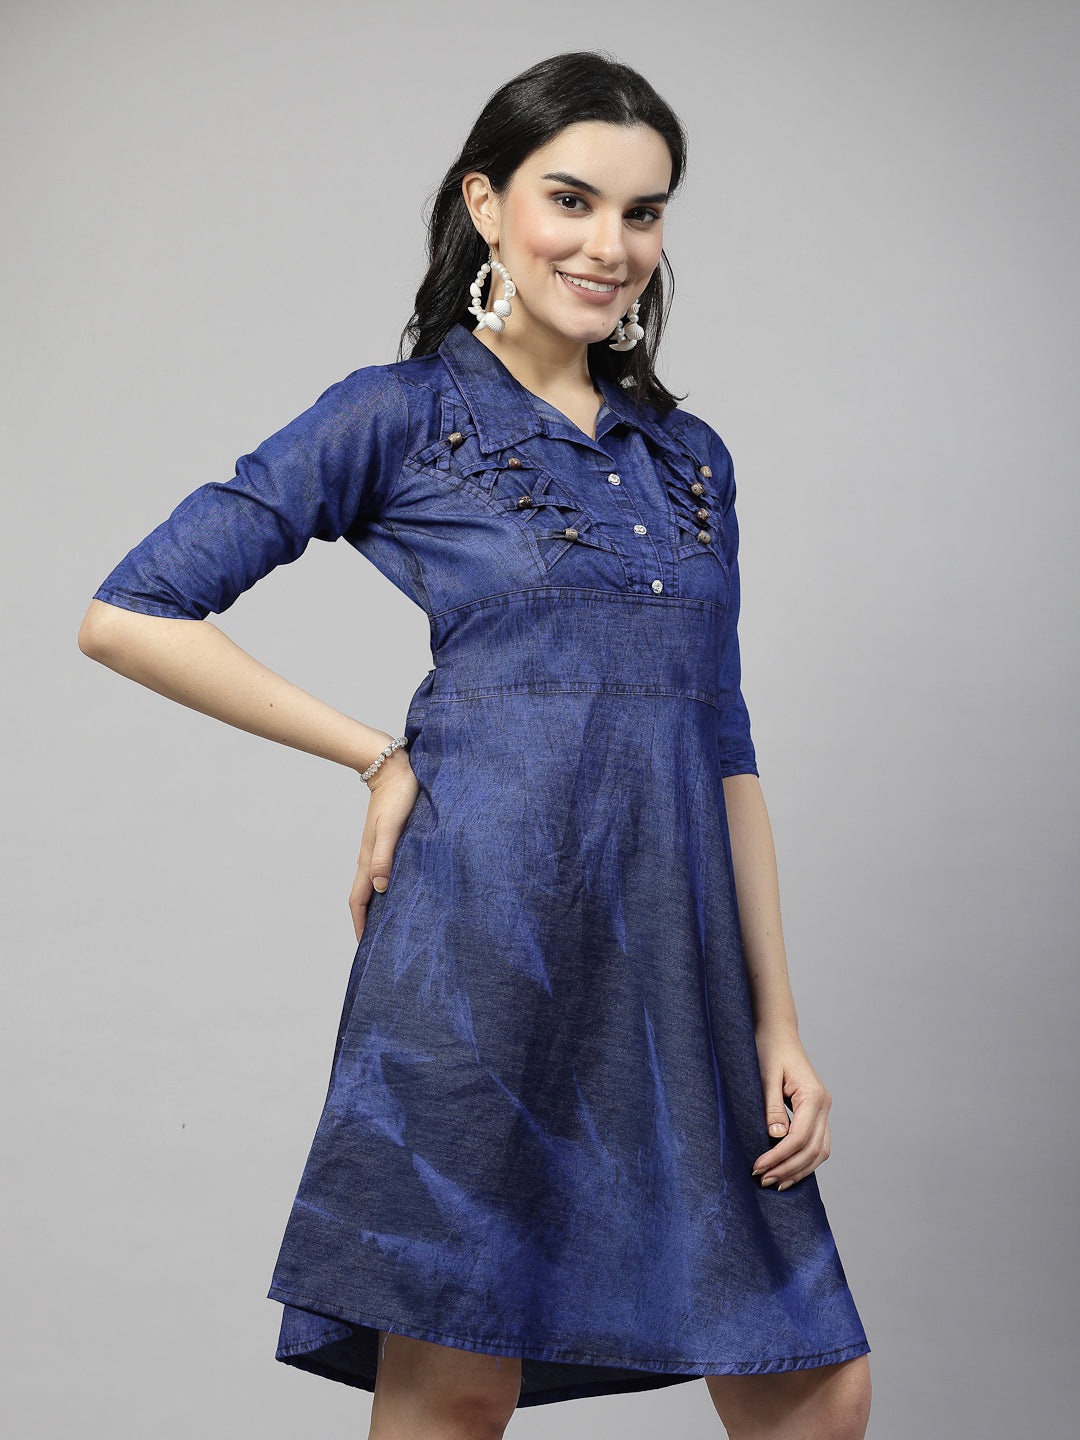 "Dazzling Denim Charm: 3/4 Sleeve Shirt Collar Neck Kurta with Wooden Beads, Silver Stones, and Comfort Fit Belt"